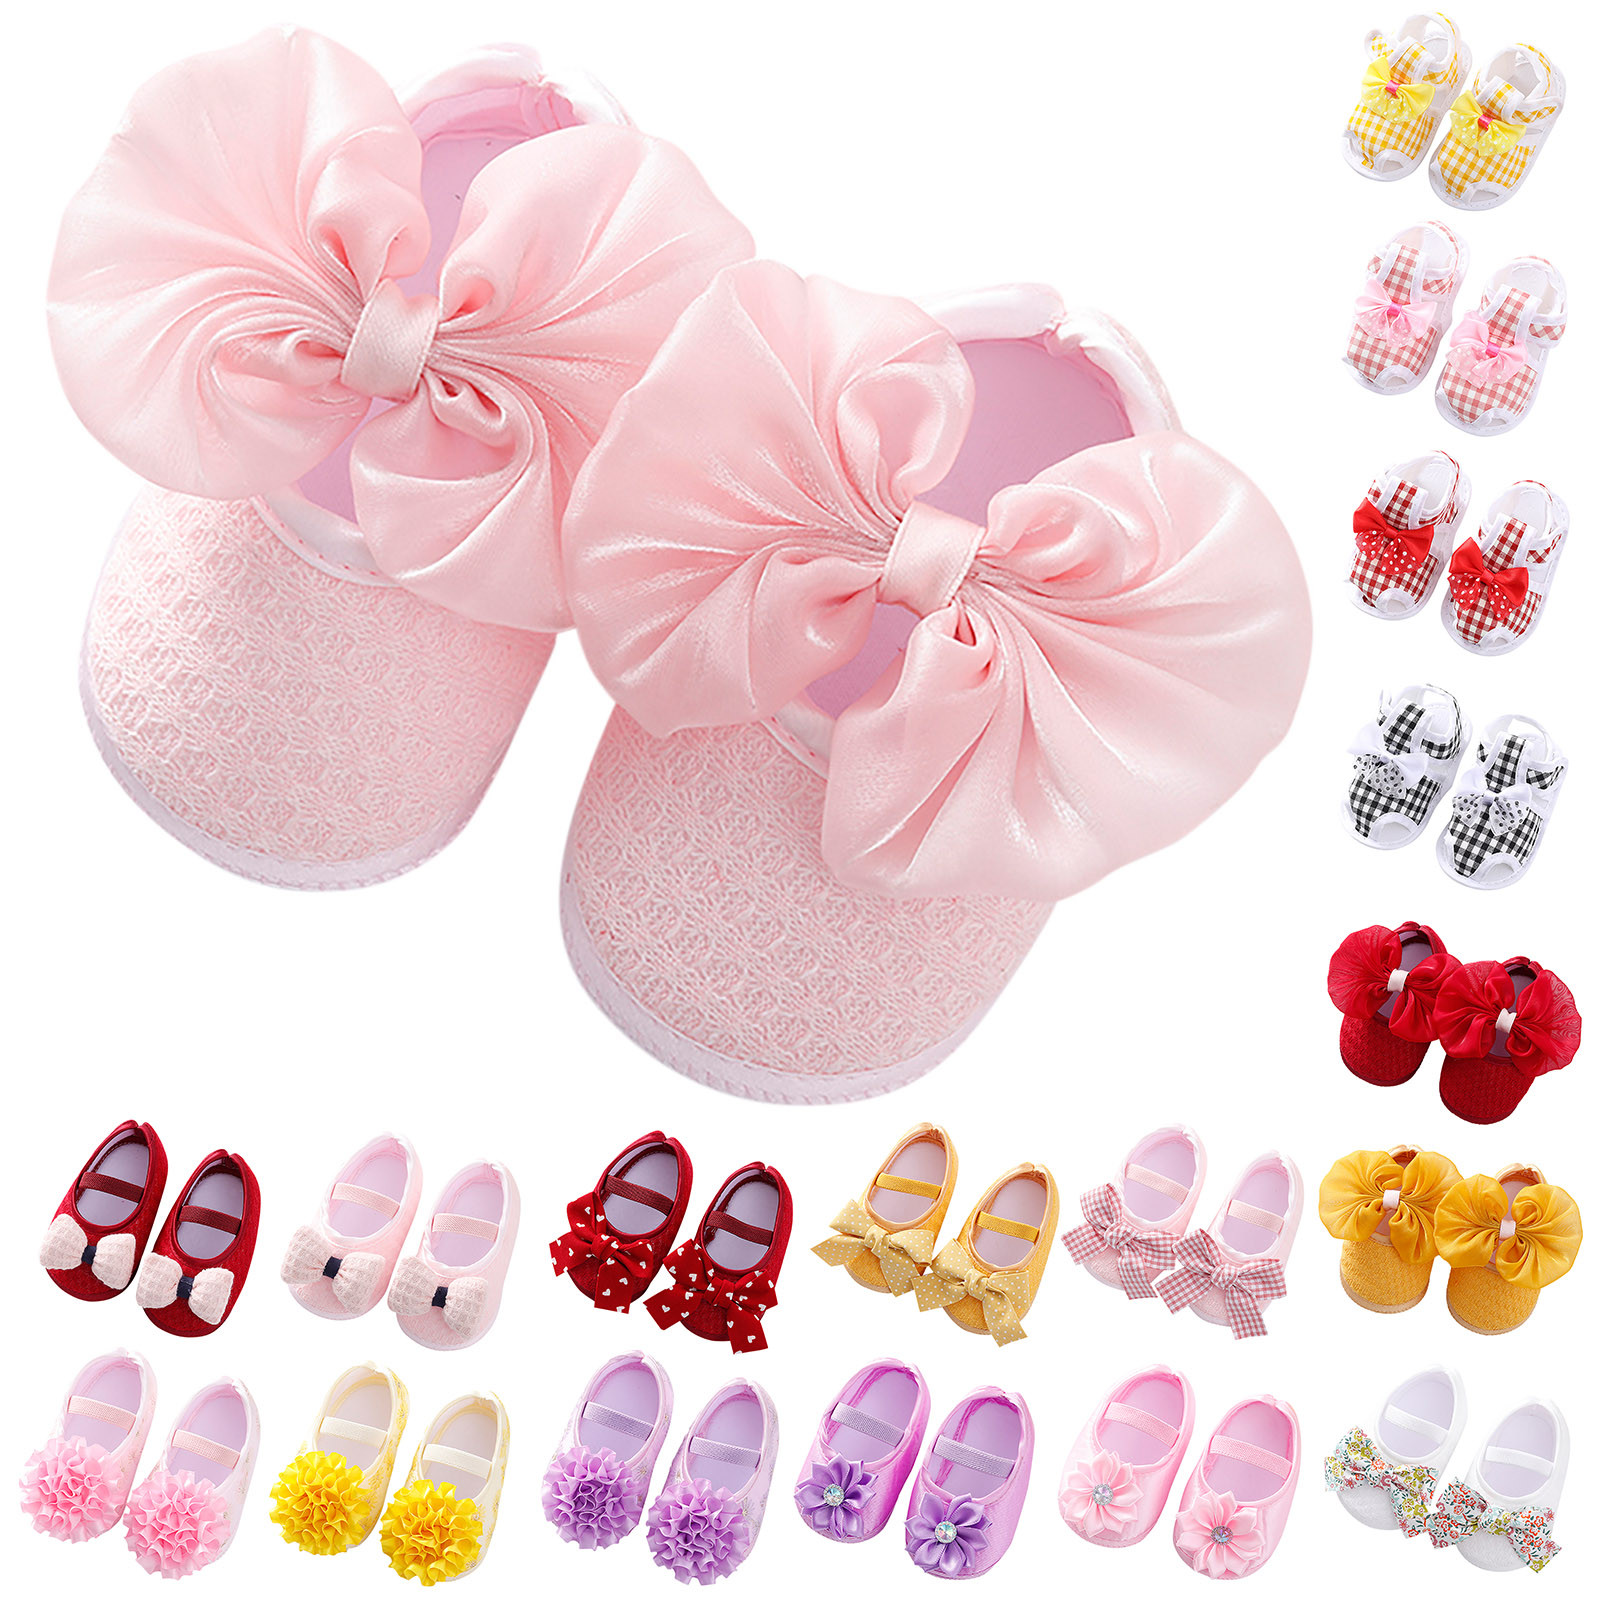 Walkers Boys Girls Baby Princess Soft Shoes Toddler Toddler Infant Shoes